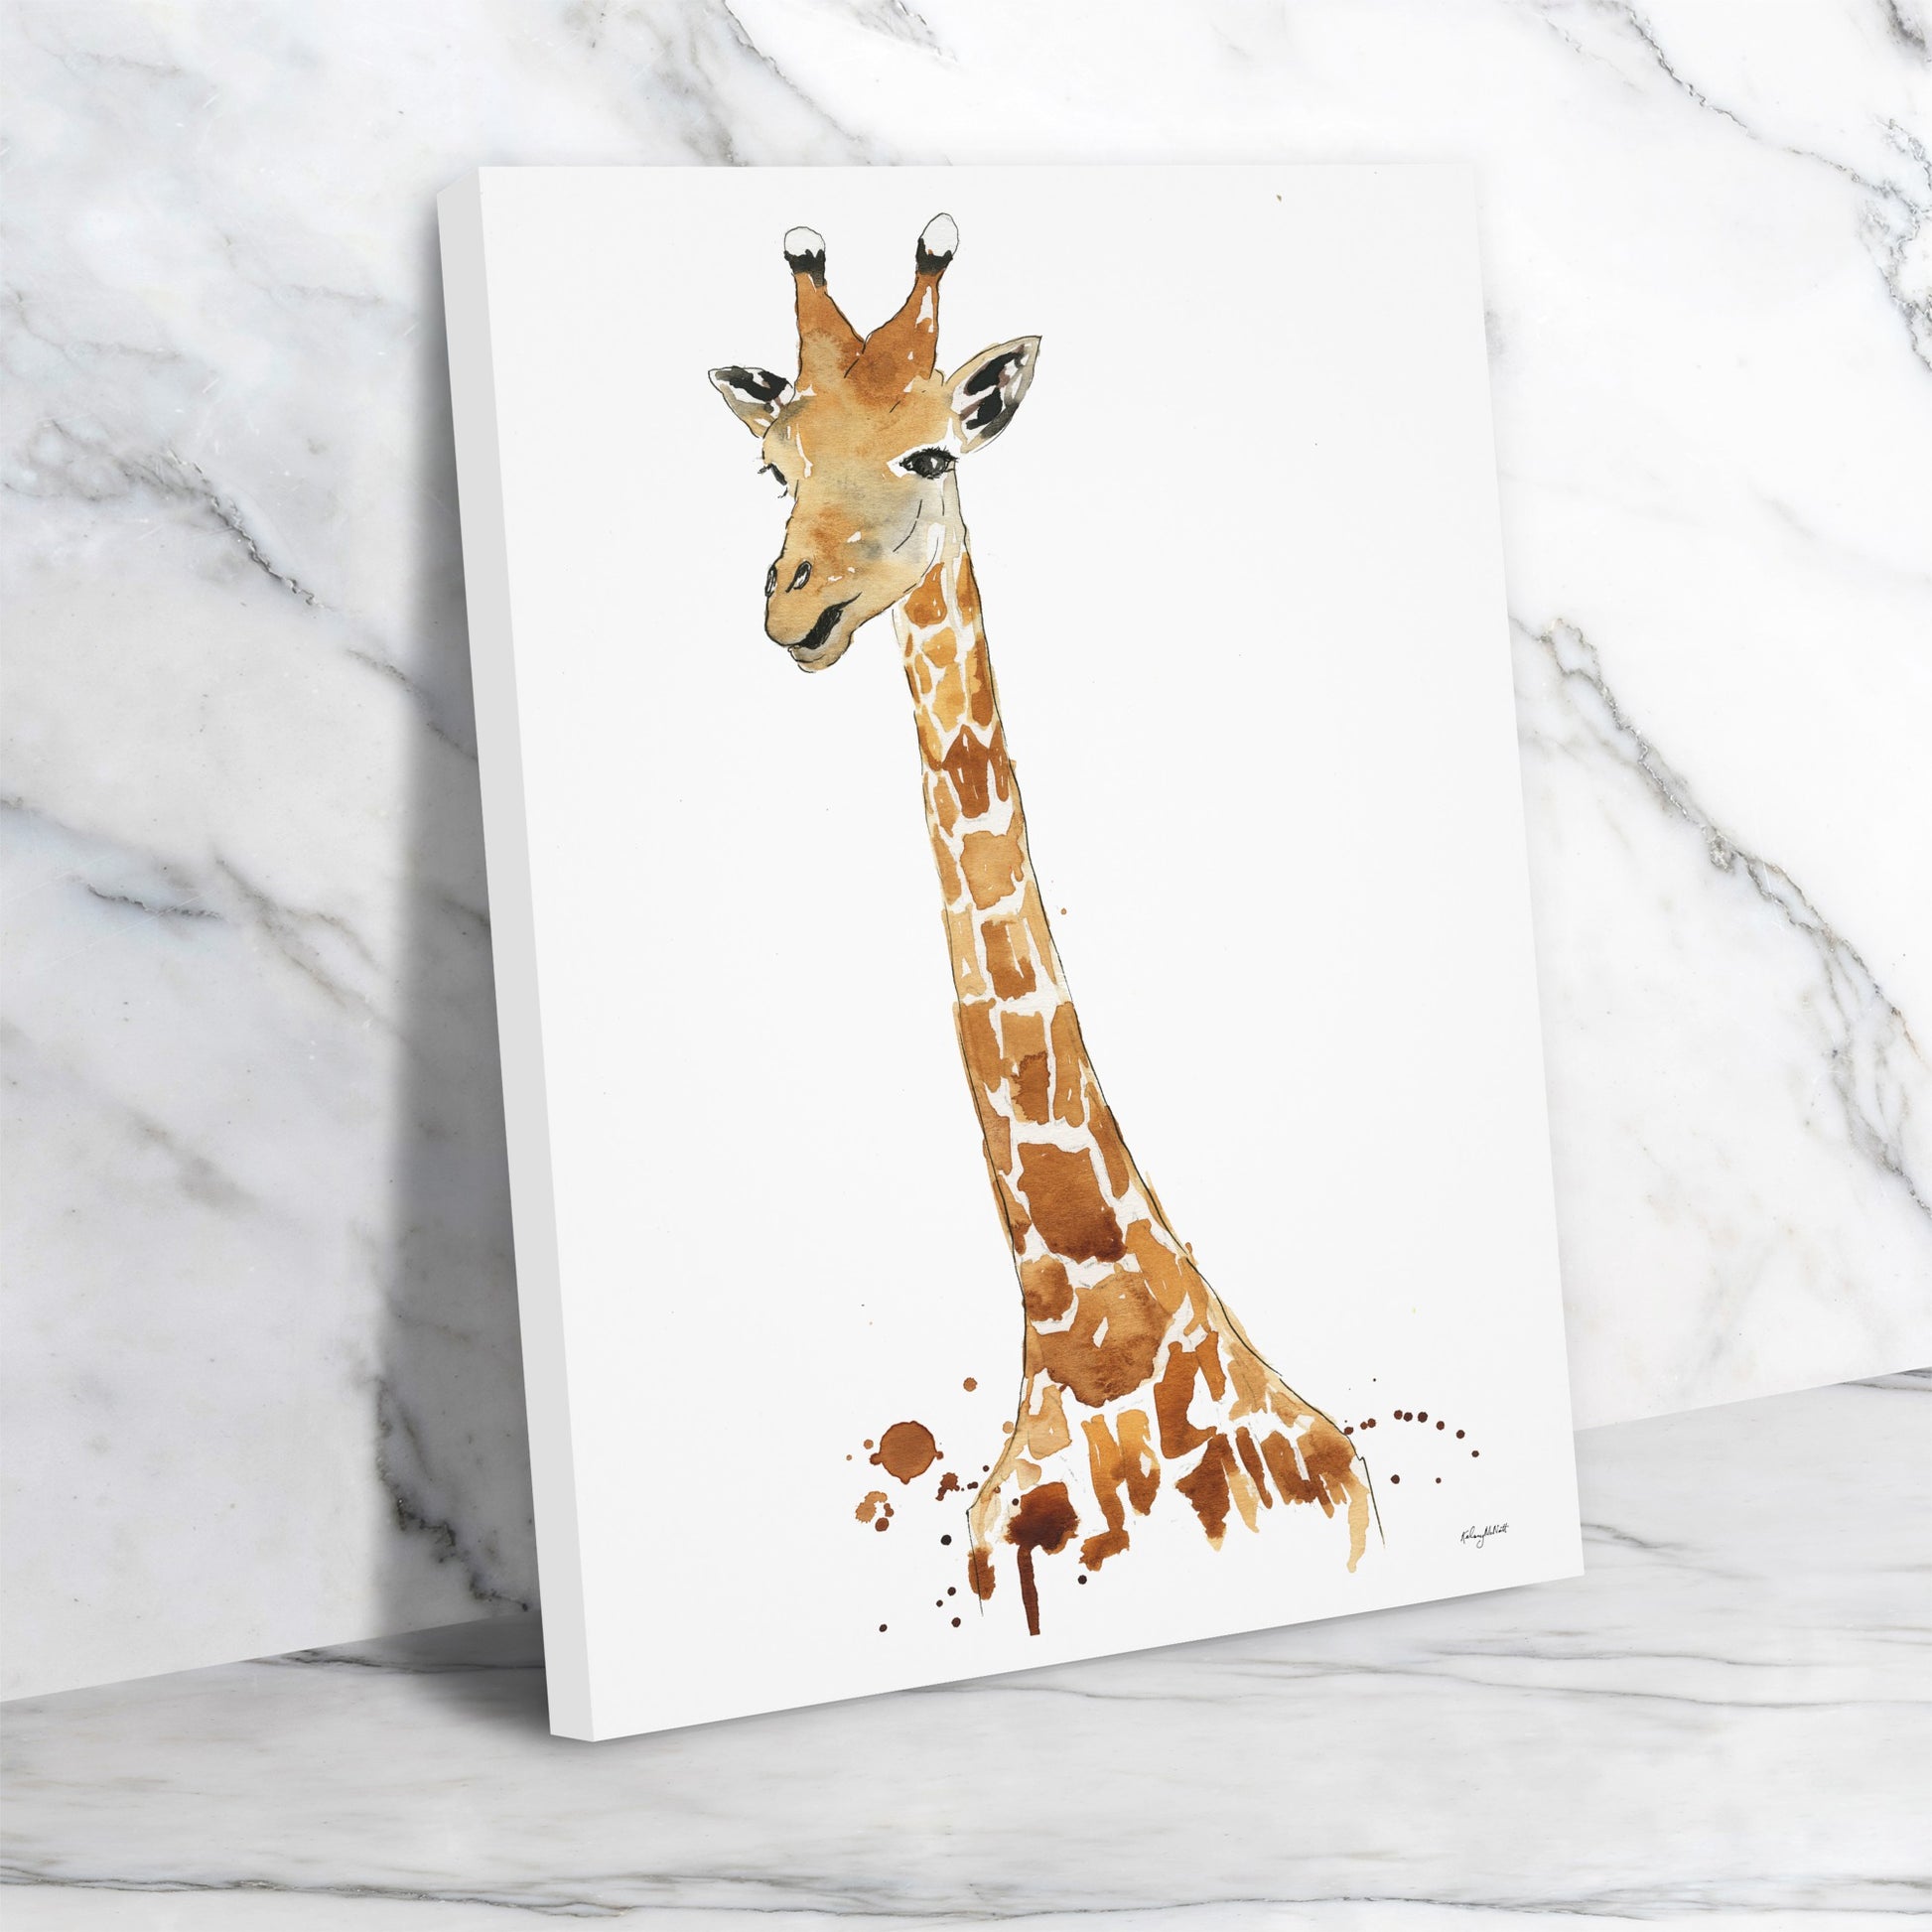 Giraffe by Kelsey Mcnatt - Wrapped Canvas - Wrapped Canvas - Americanflat